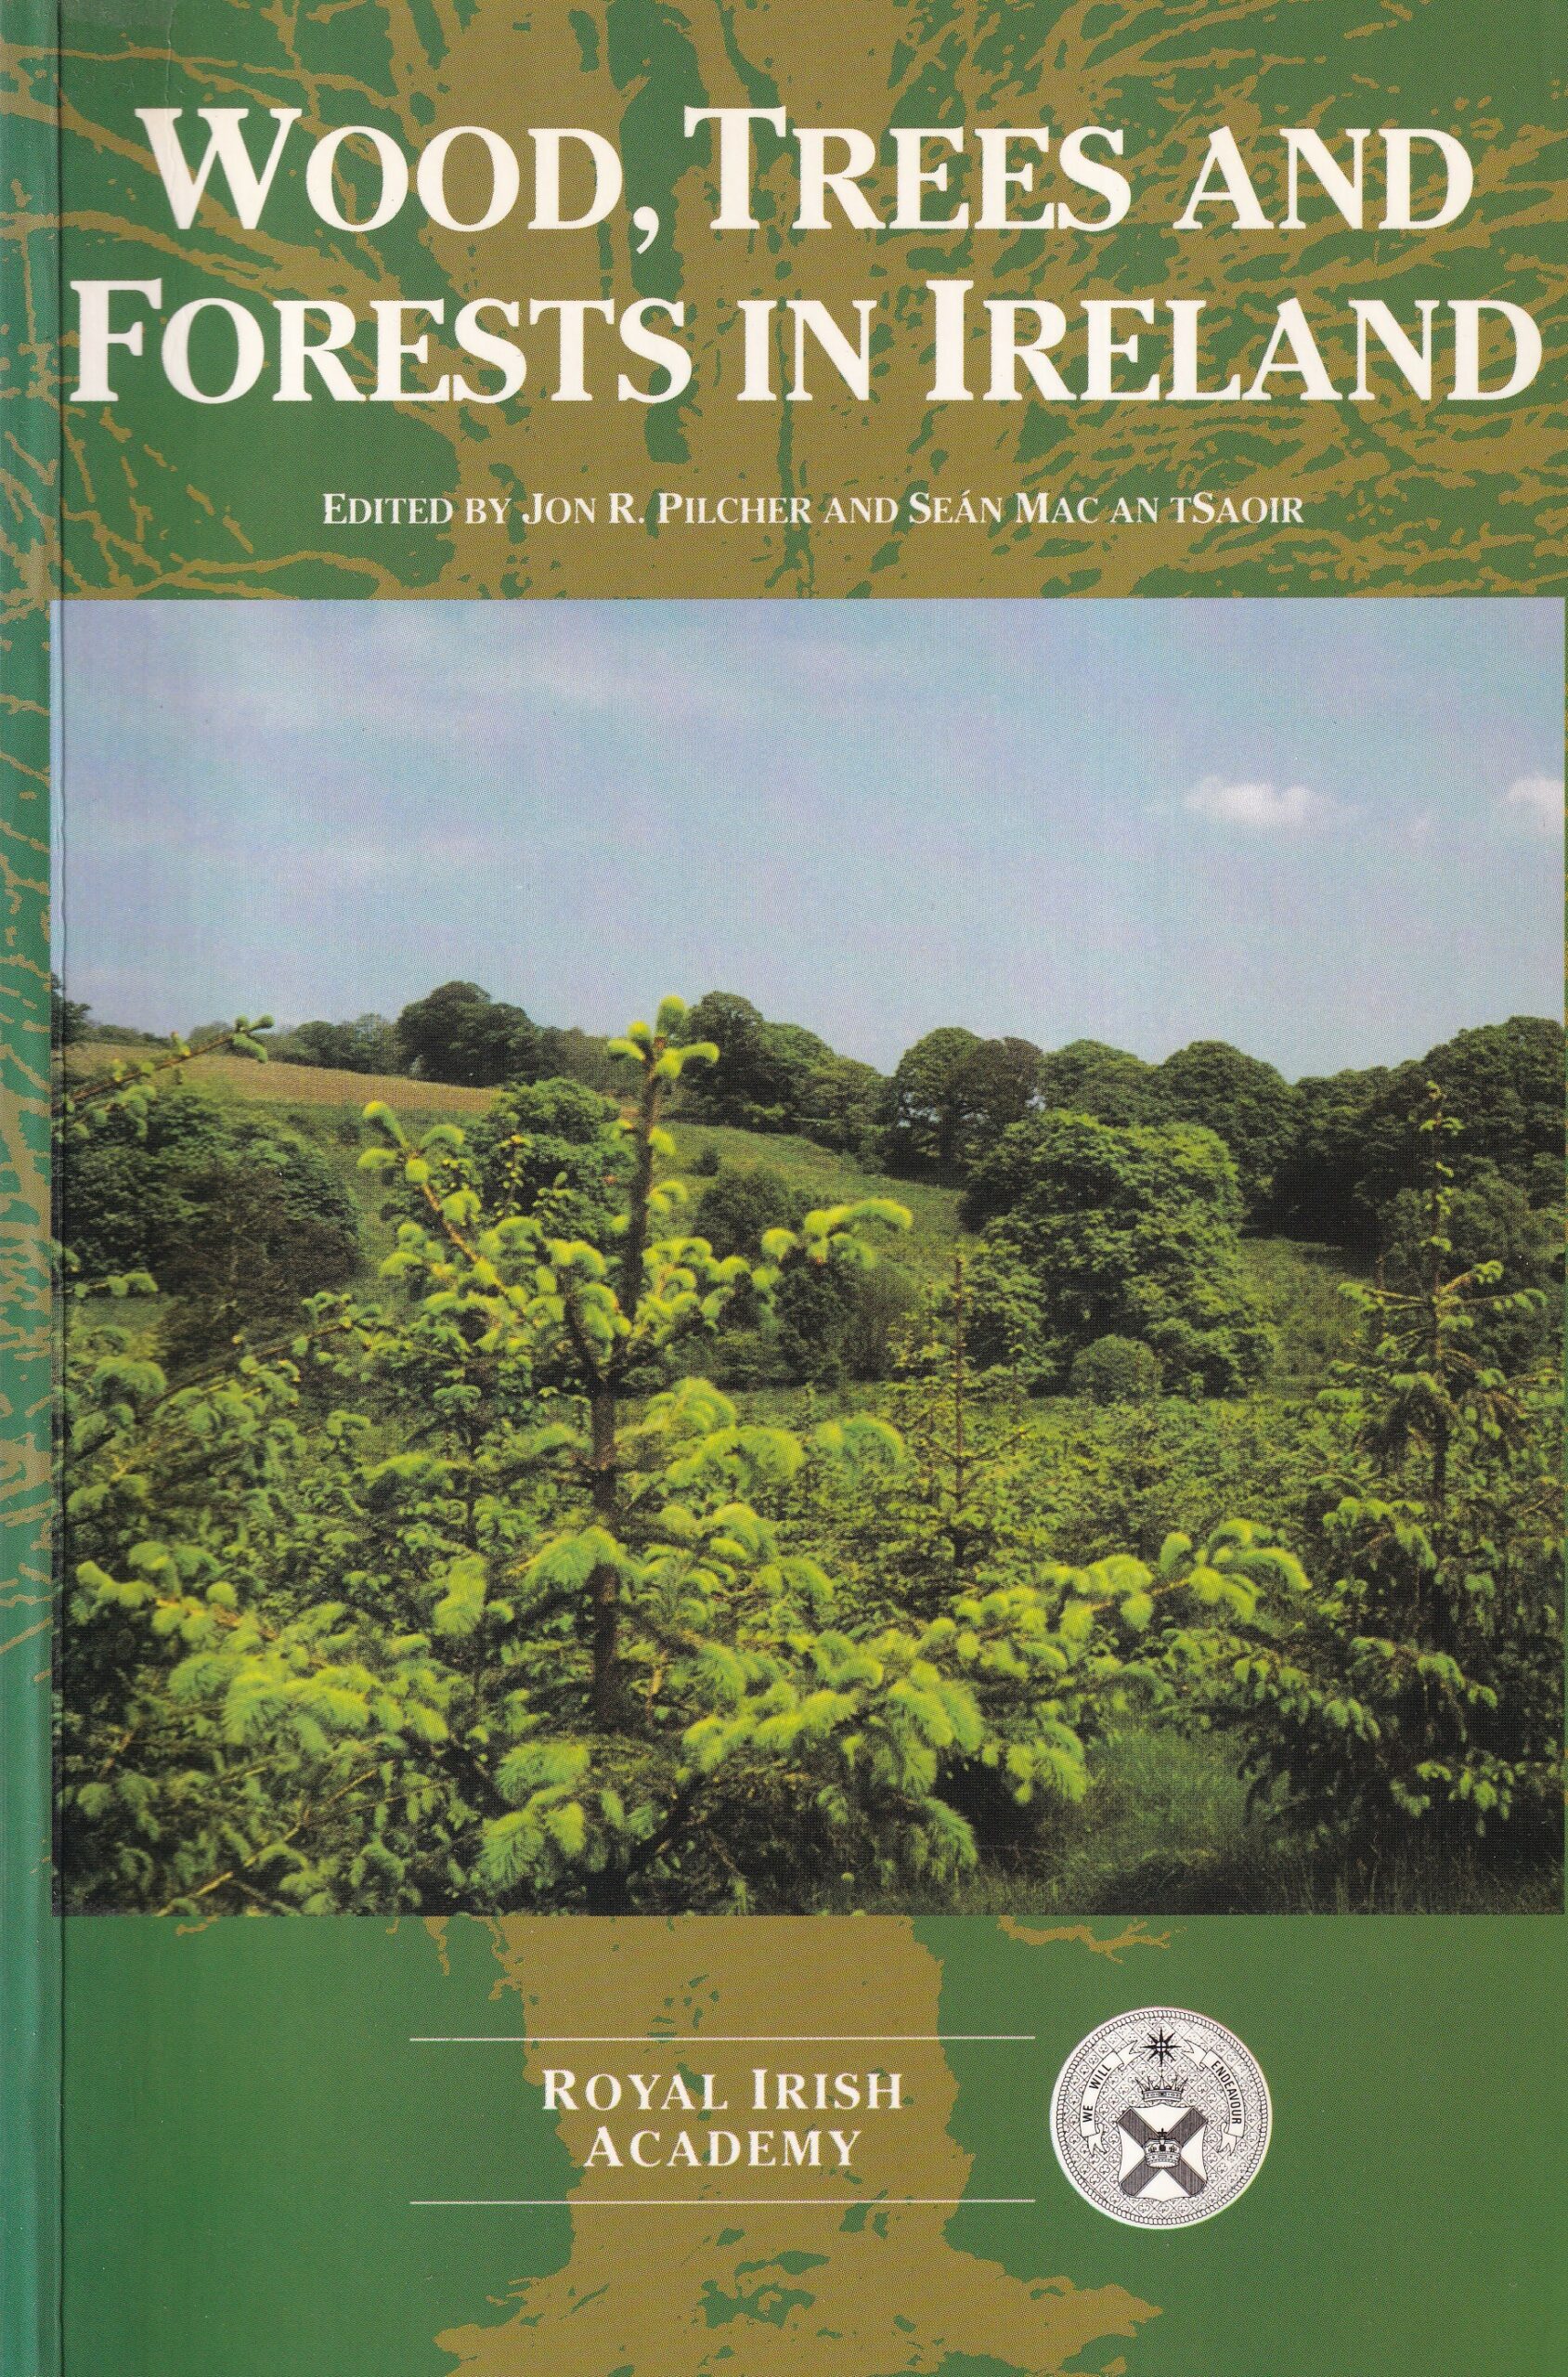 Wood, Trees and Forests in Ireland | Jon R. Pilcher and Seán Mac An tSaoir (eds.) | Charlie Byrne's